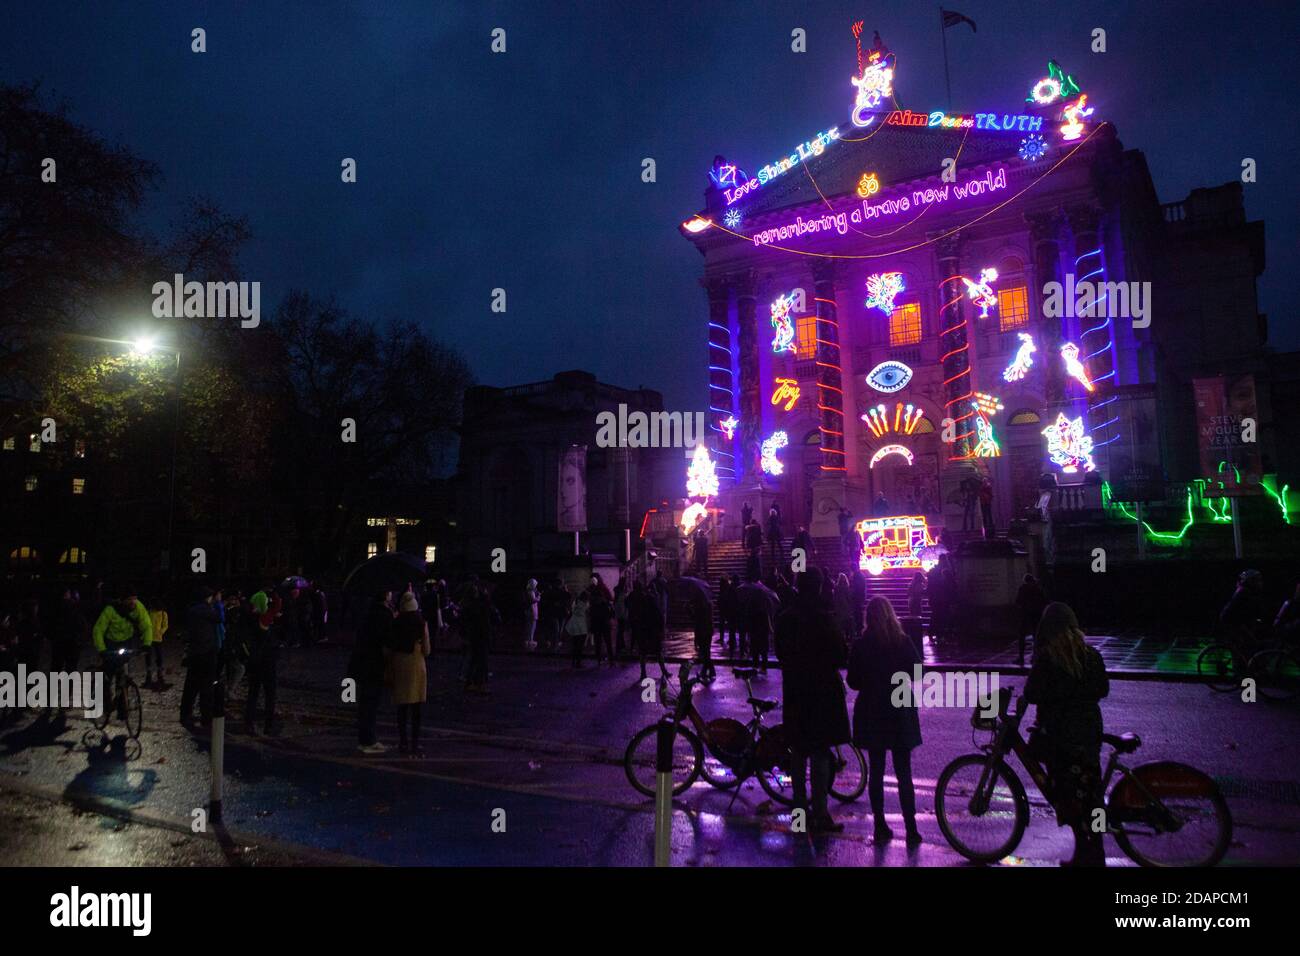 London, UK, 14 November 2020: despite some rain, Londoners flocked to see artist Chila Kumari Singh Burman's winter lights commission at Tate Britain, 'Remembering A Brave New World'. Some were marking the start of Diwali but others were just looking for any form of outdoor entertainment allowed under lockdown restrictions. Anna Watson/Alamy Live News Stock Photo